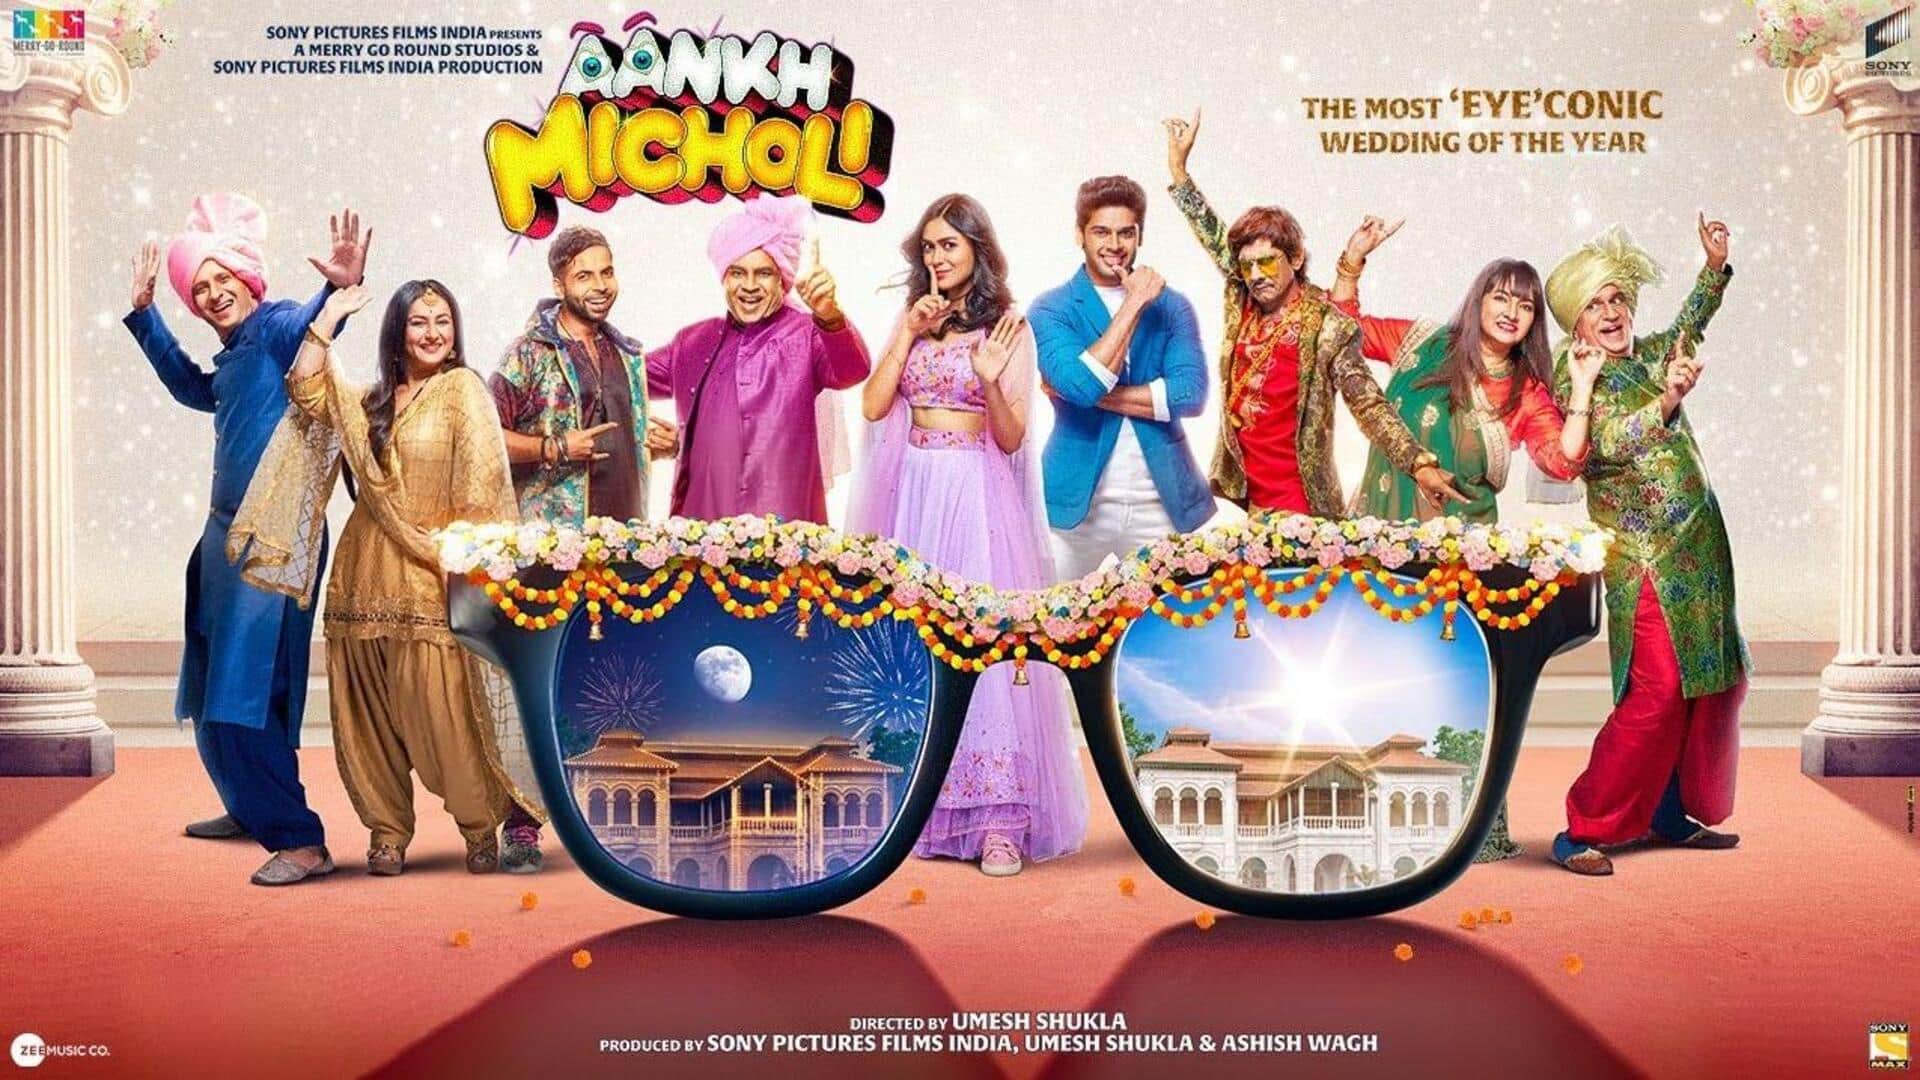 Box office collection: 'Aankh Micholi' struggles in vain